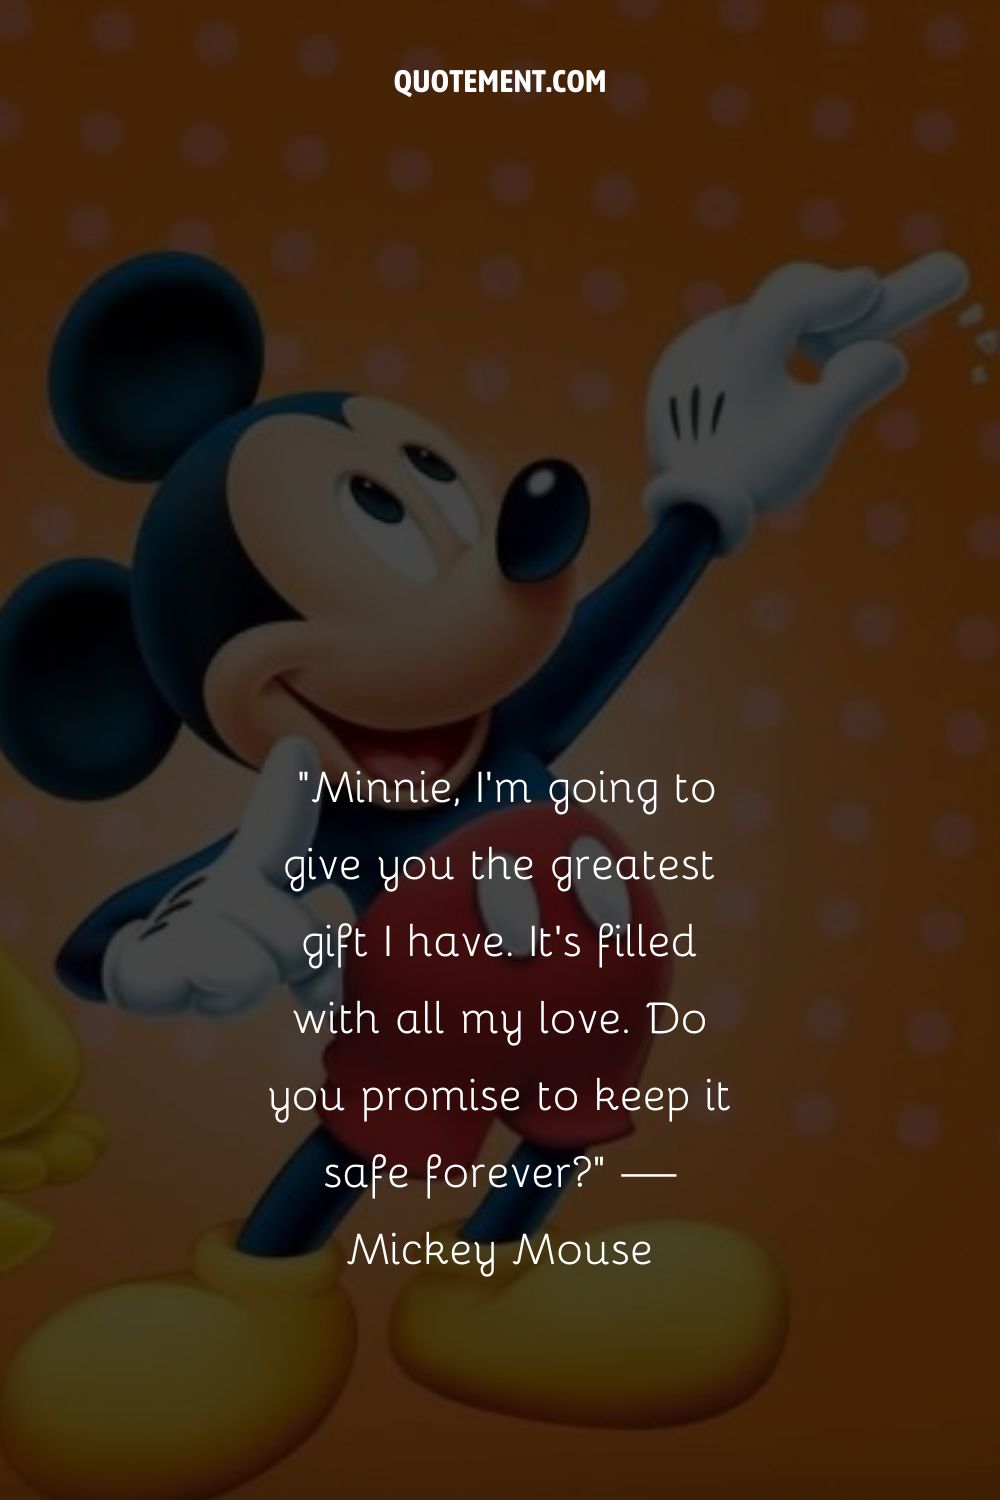 Mickey Mouse holding a chalk in one hand and pointing his finger with another
